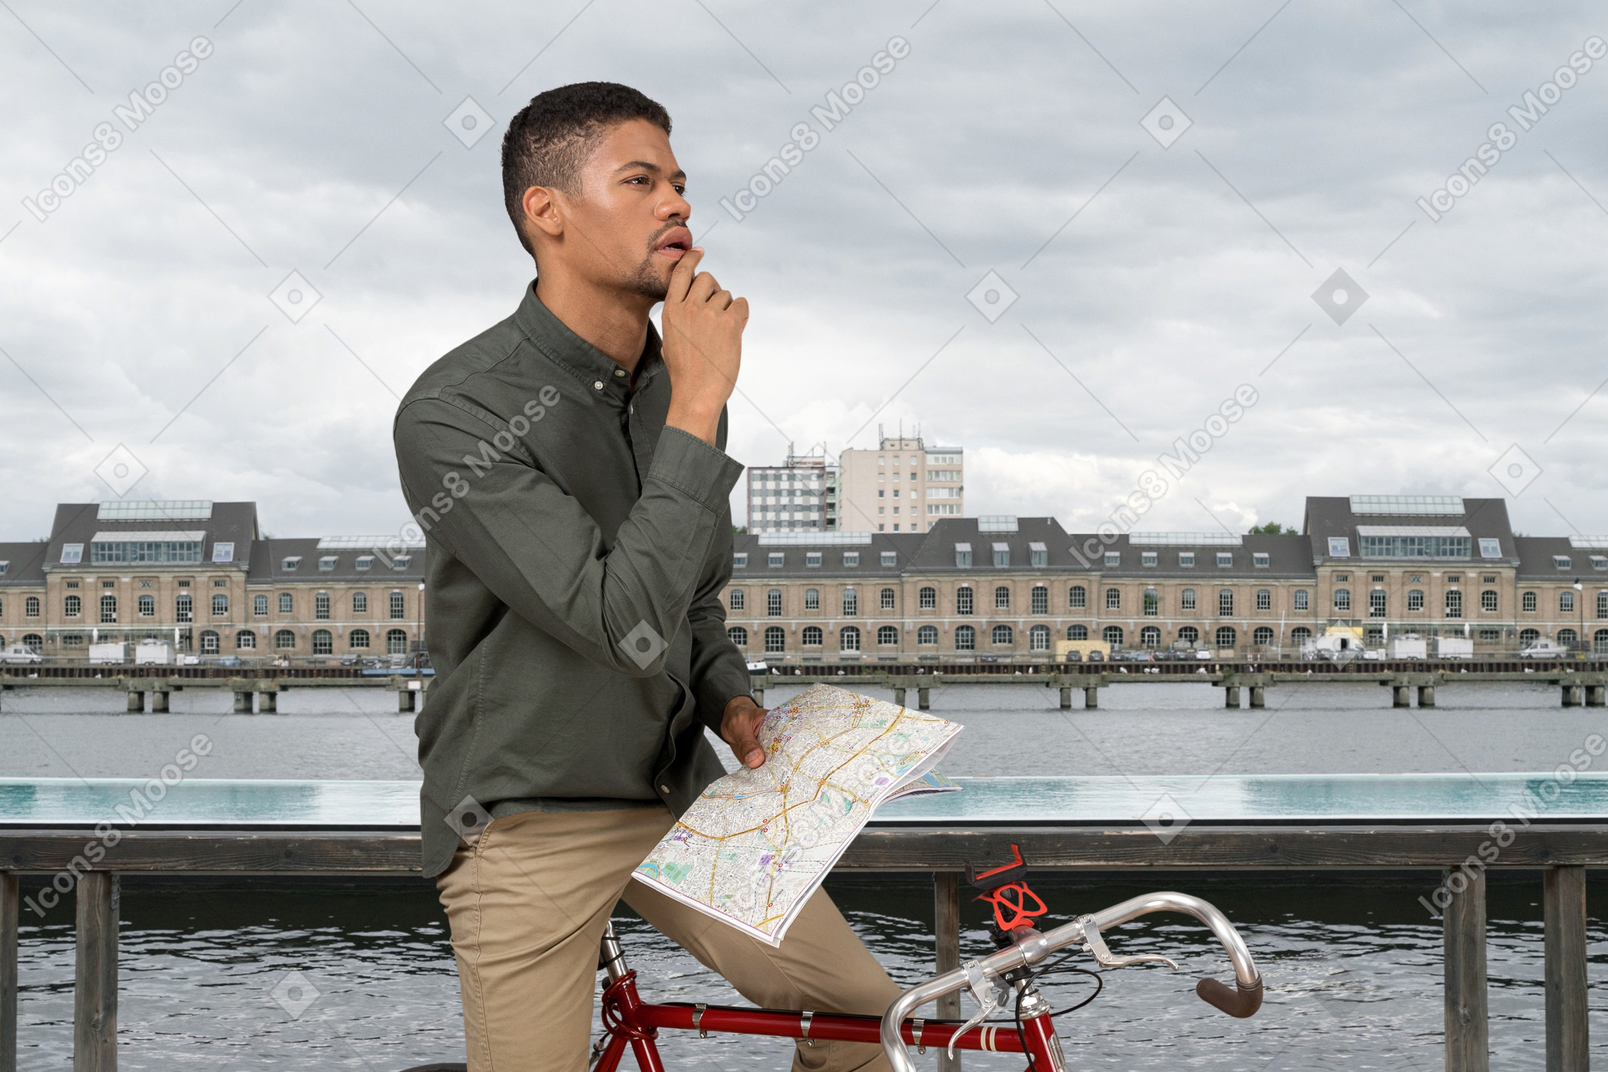 A man on a bike with a map in his hand